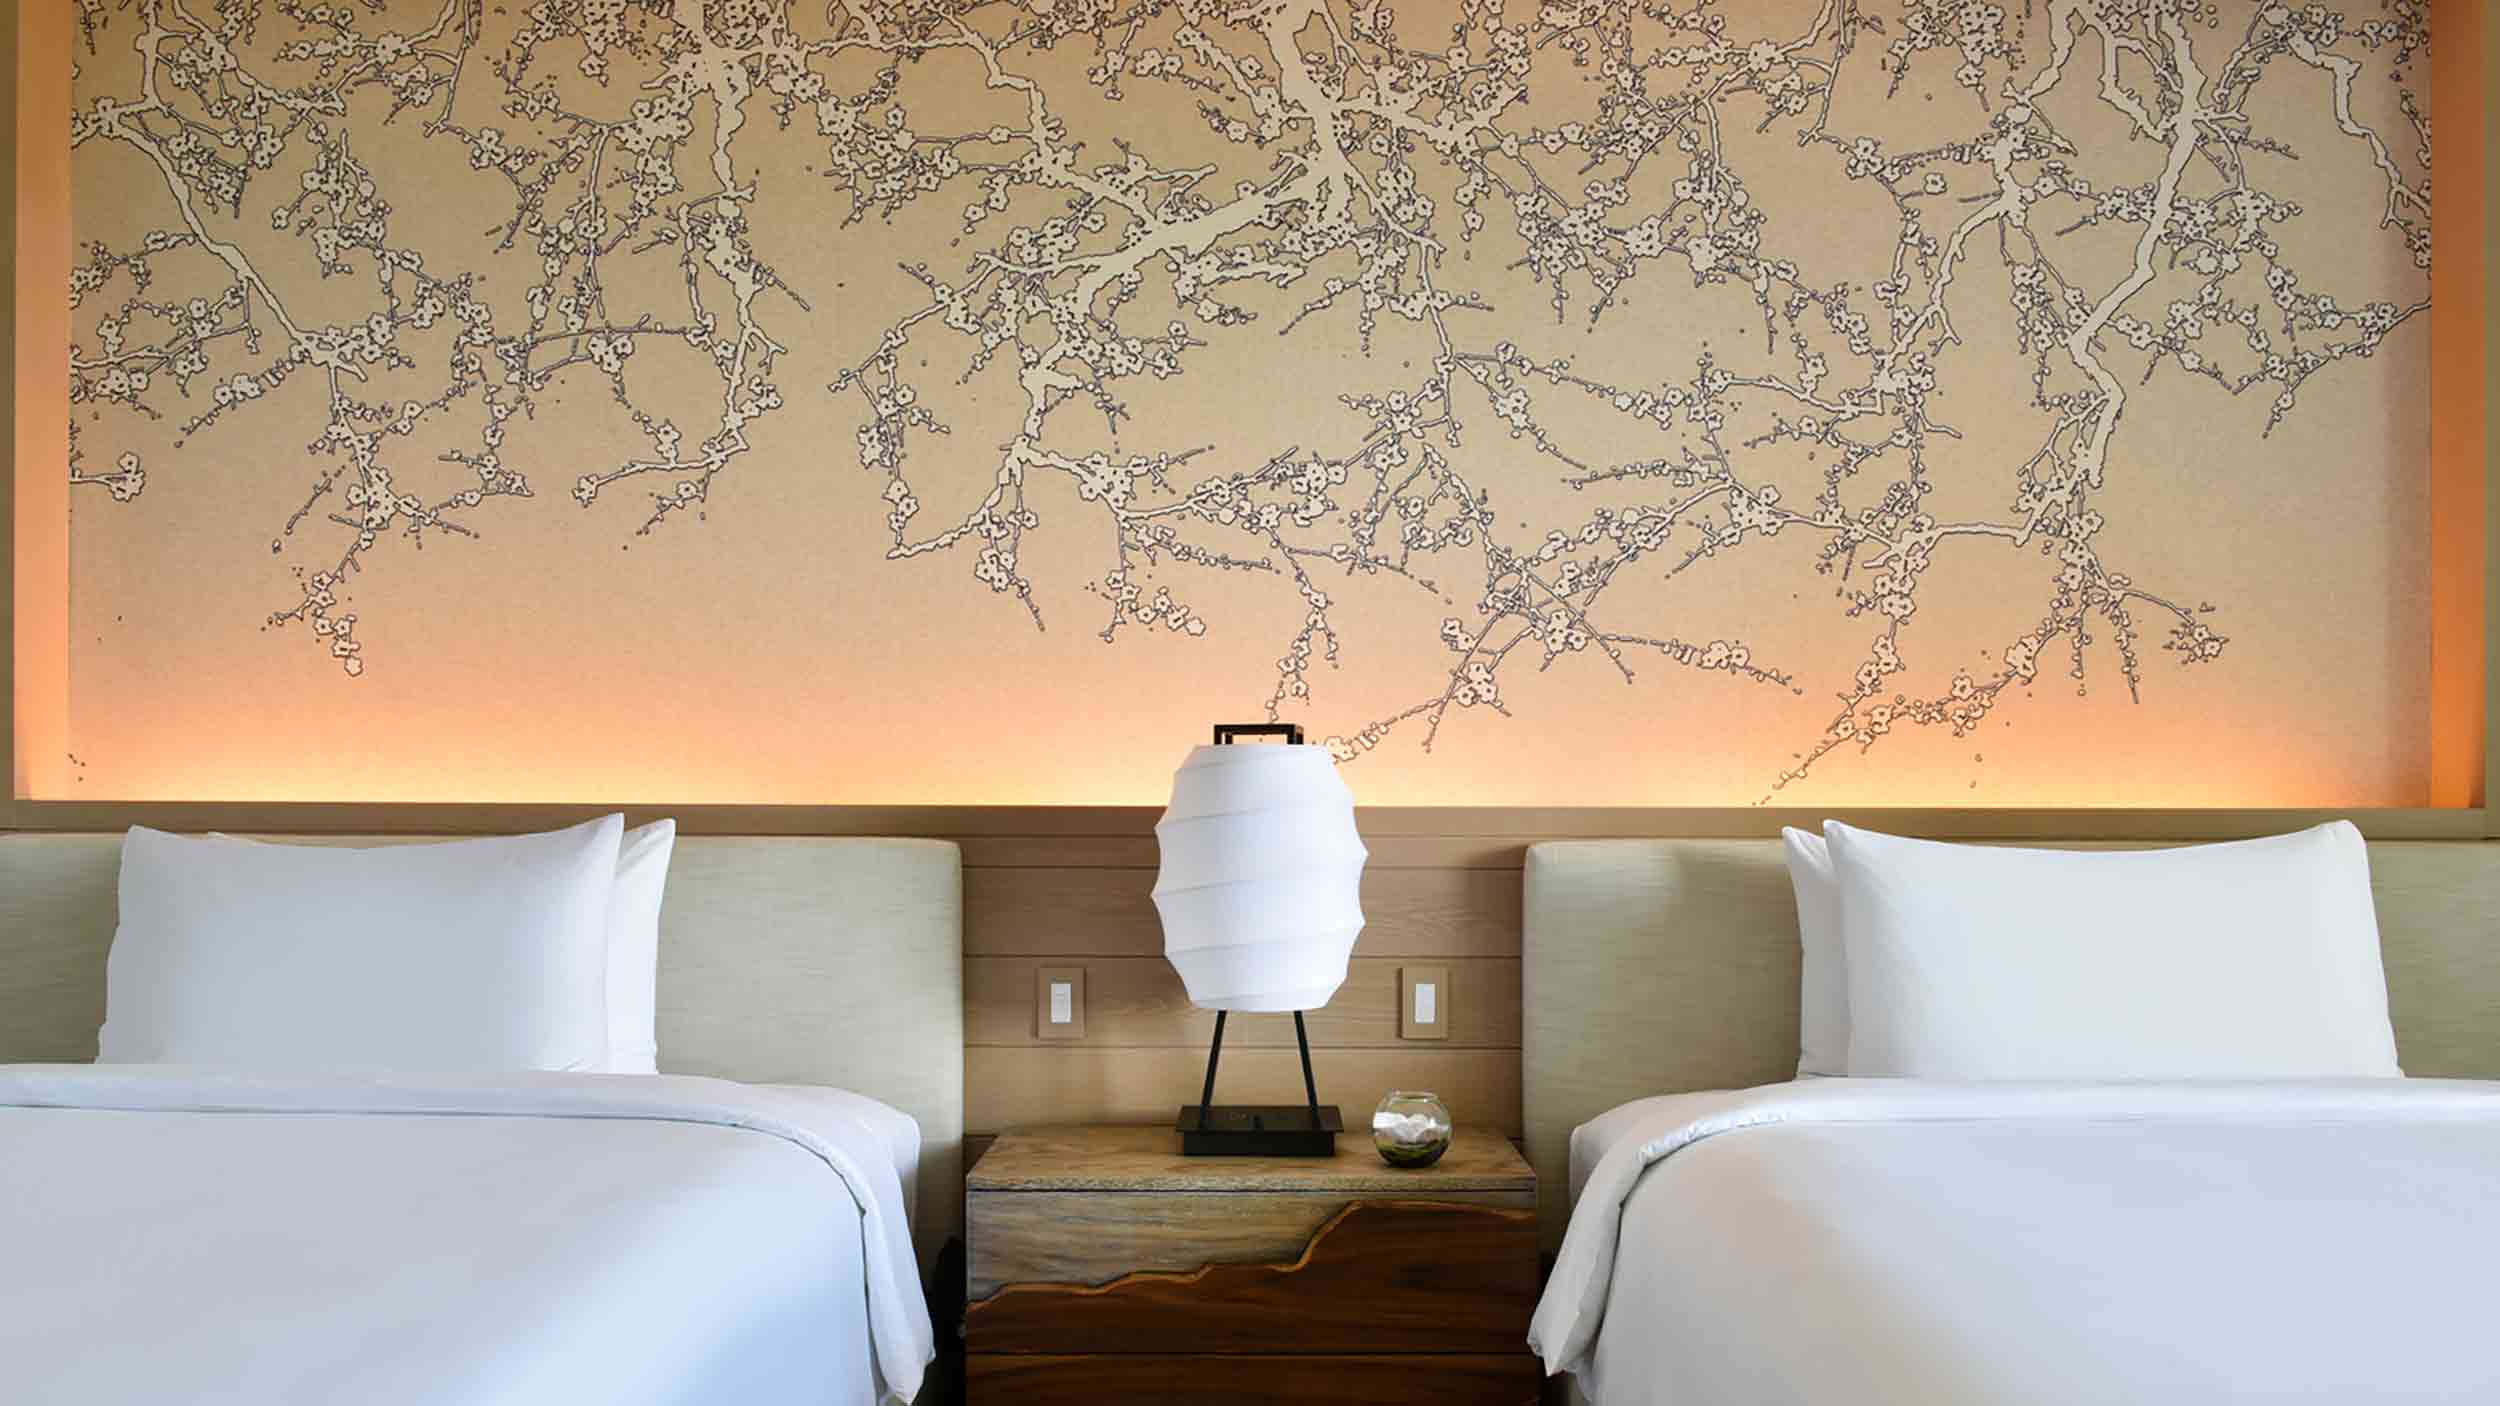 Closeup of double beds and wall art in Nobu Miami Beach Hotel.